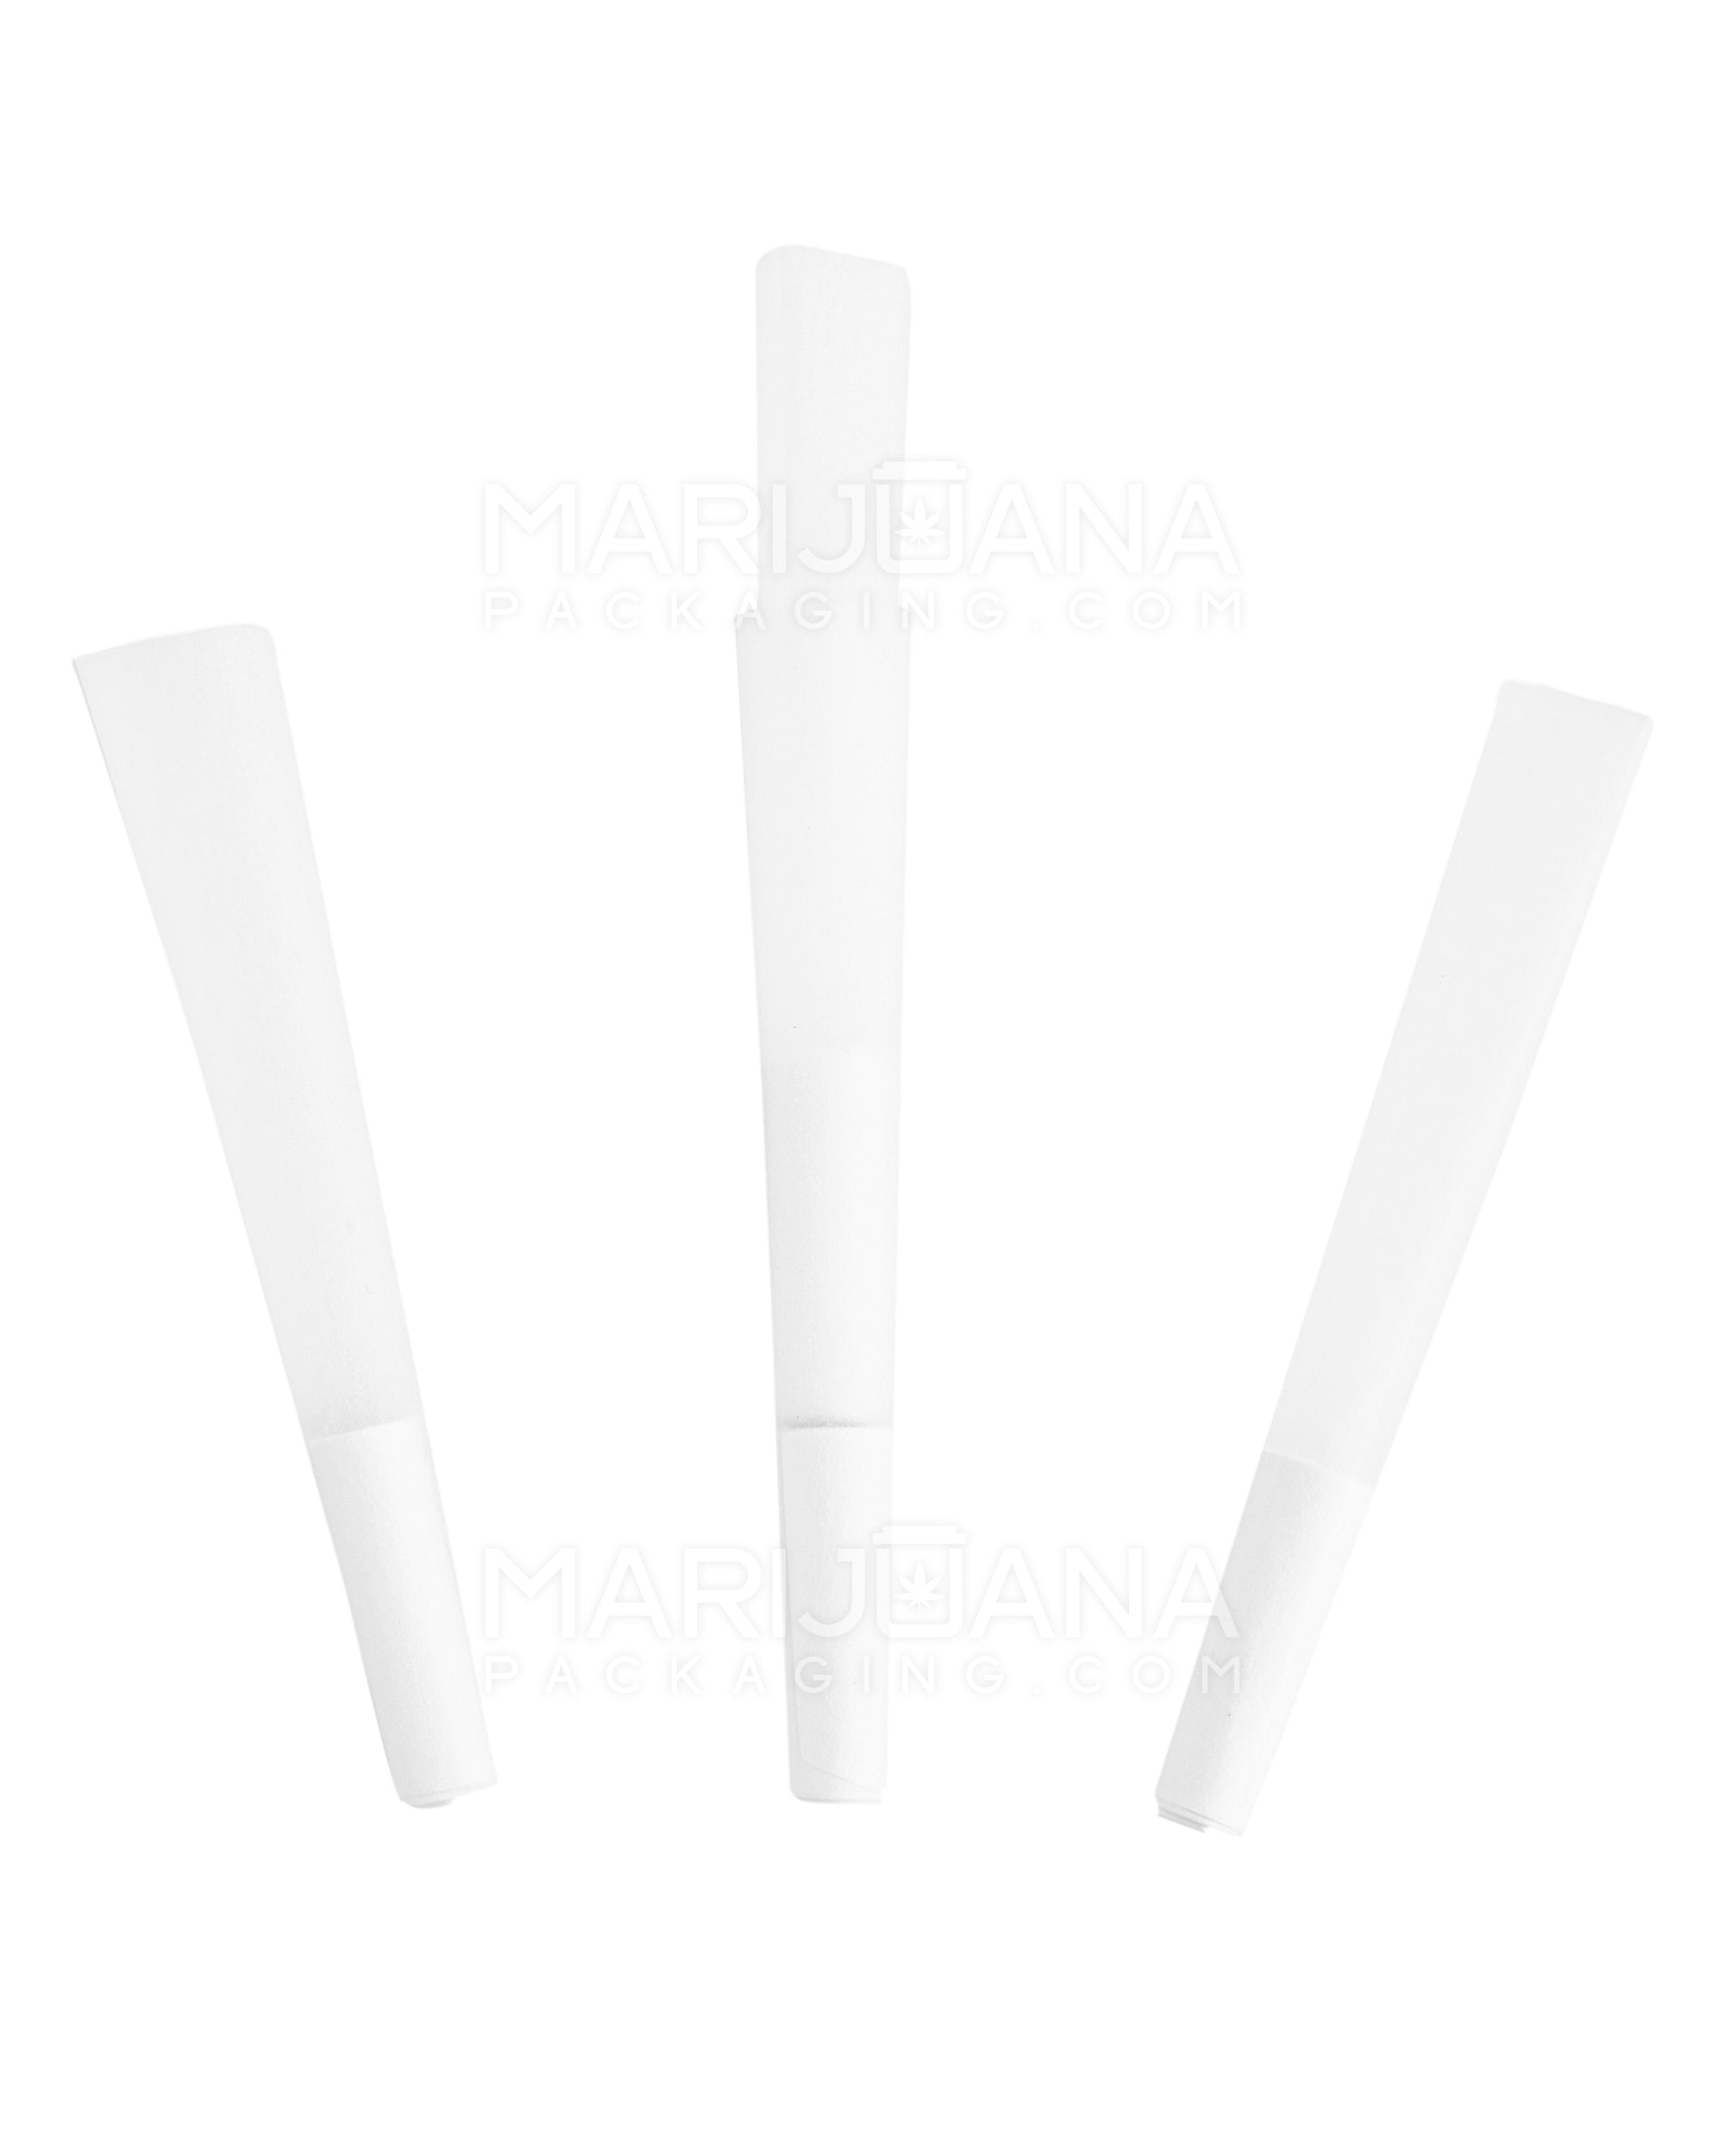 Dog Walker Size Mini Pre-Rolled Cones | 70mm - White Paper - 1200 Count - 4